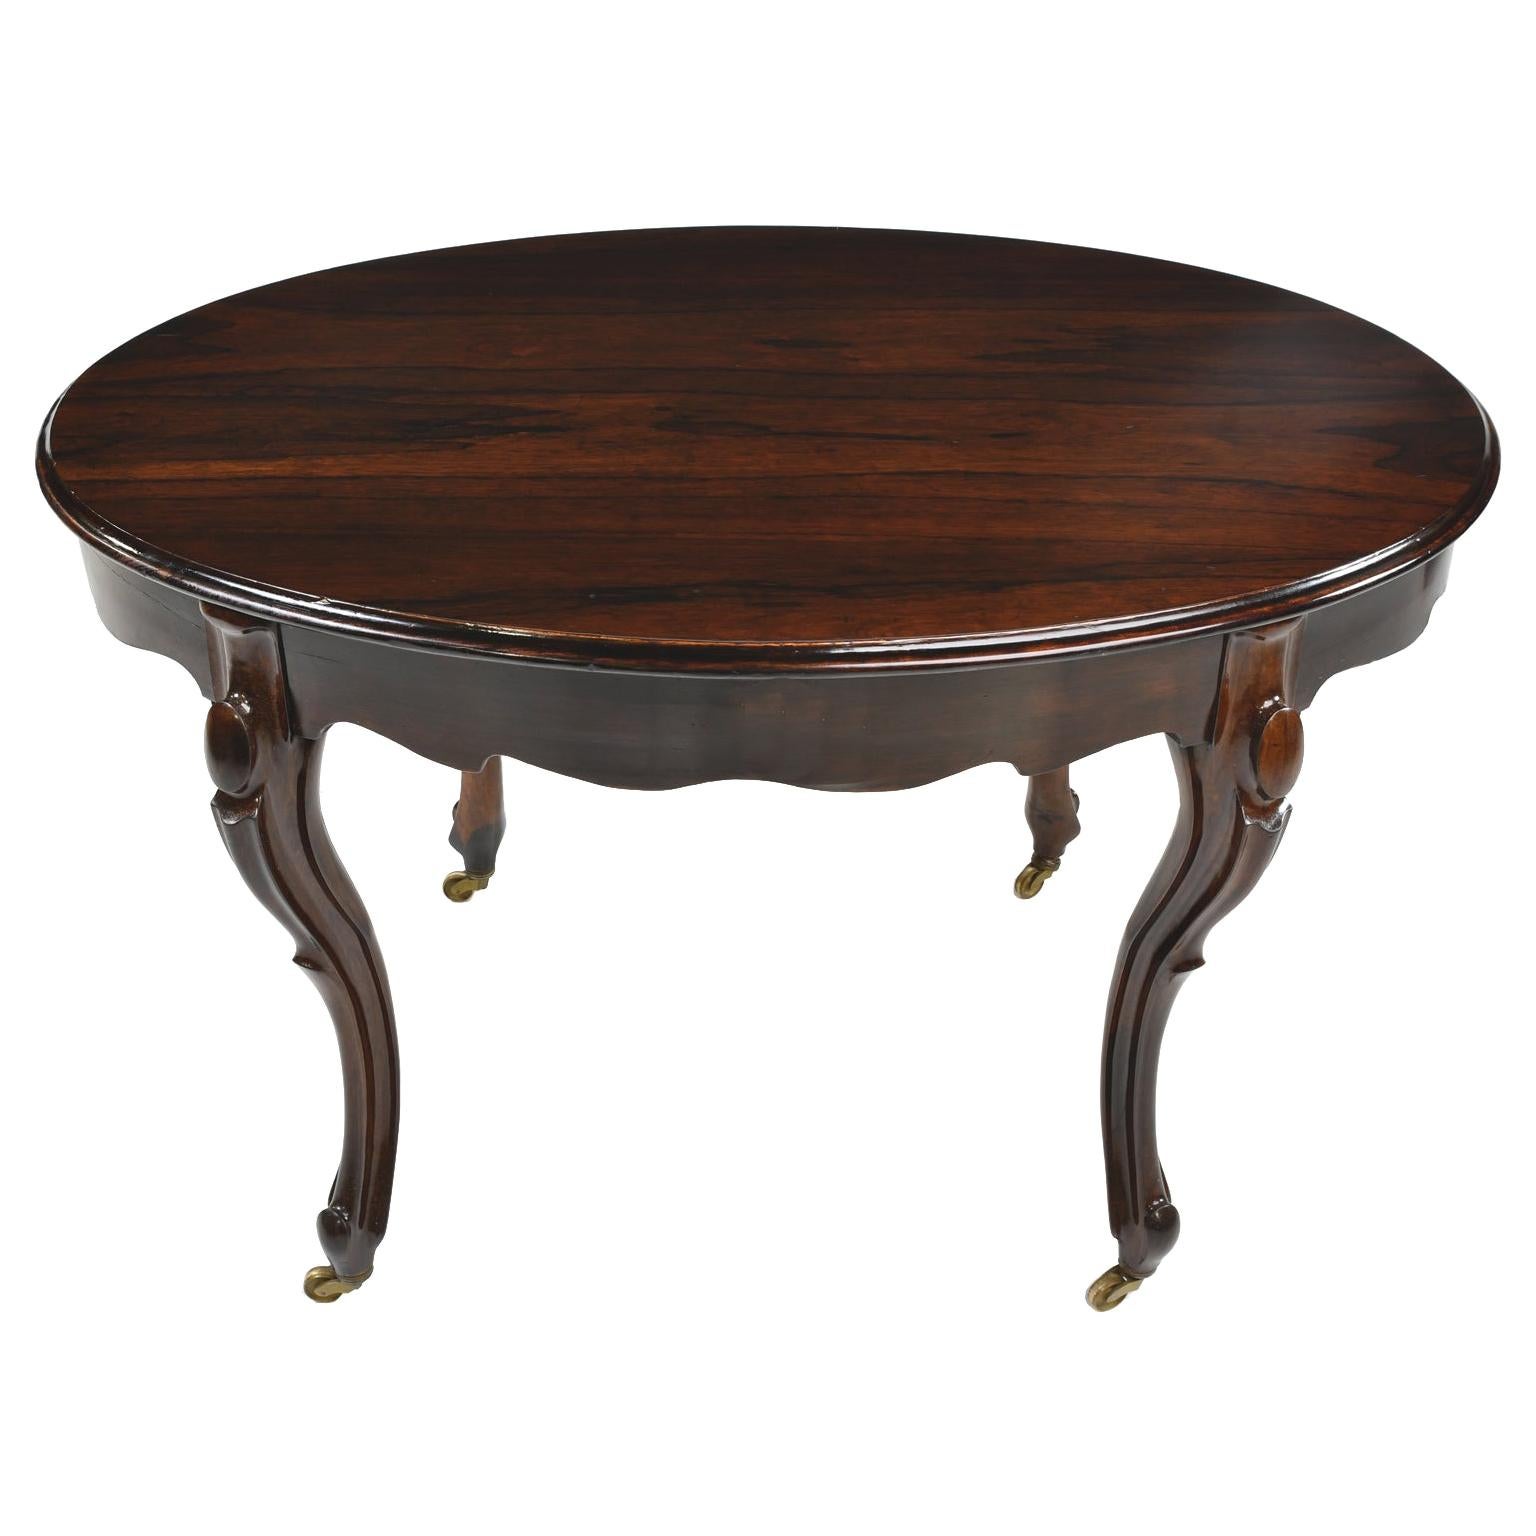 Antique French Louis Philippe Oval Dining/ Center Table in Rosewood, circa 1840